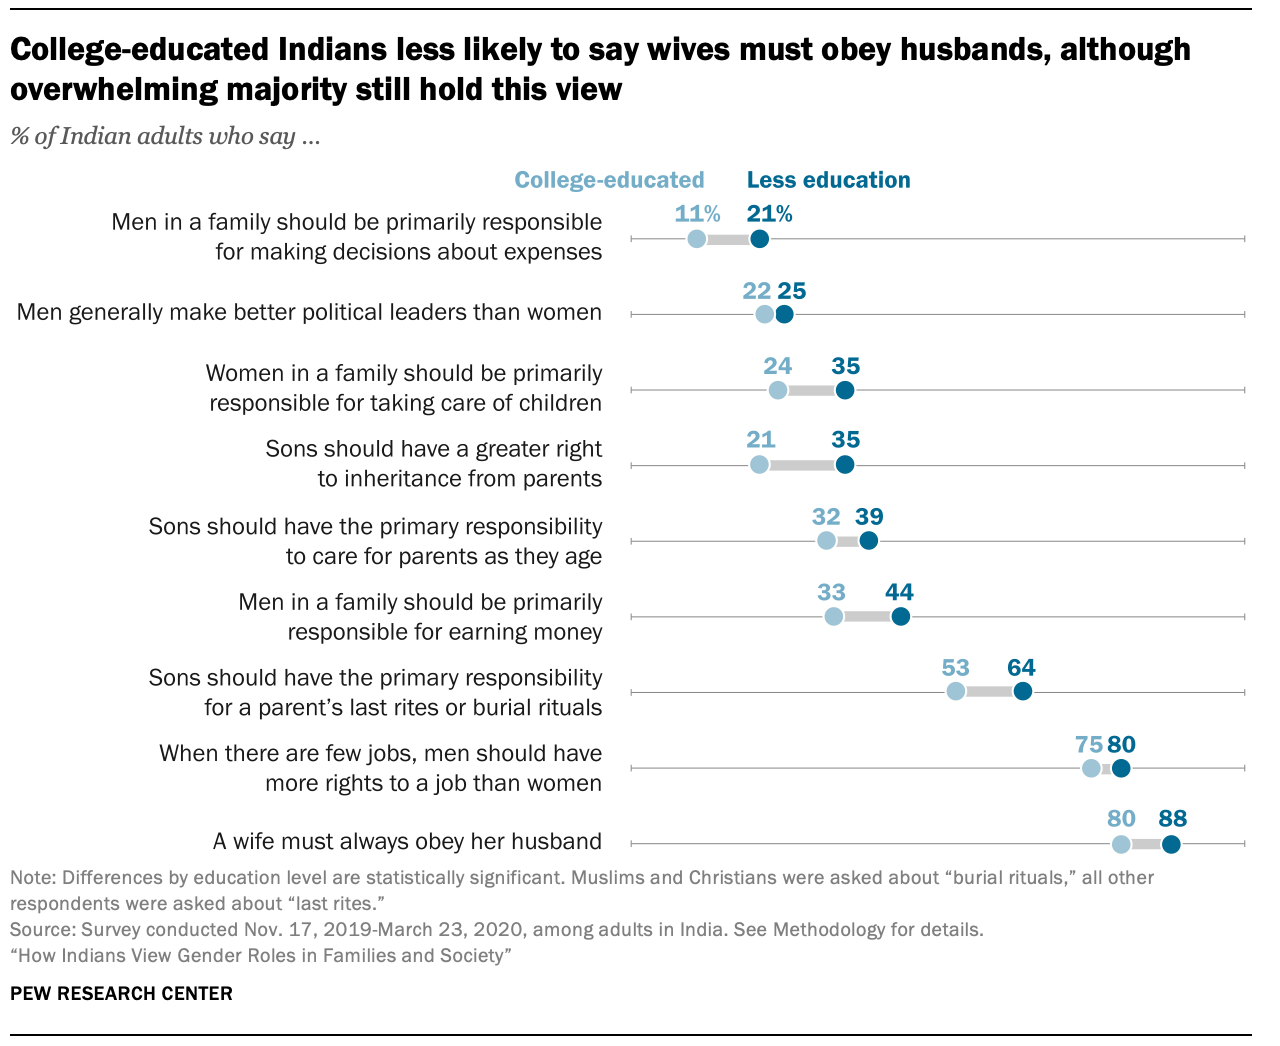 College-educated Indians less likely to say wives must obey husbands, although overwhelming majority still hold this view